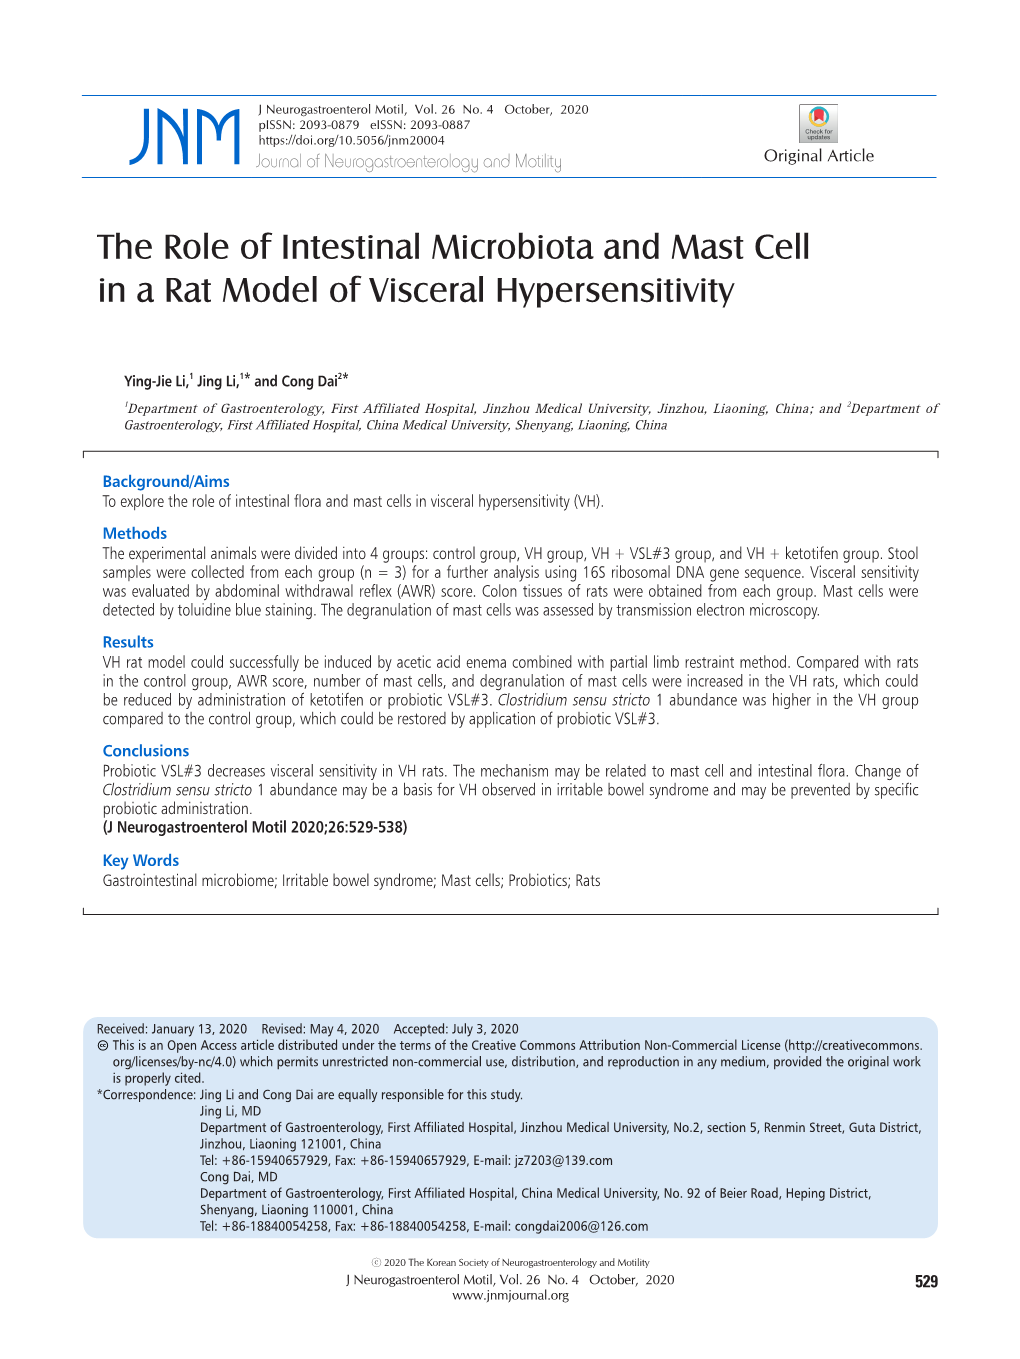 The Role of Intestinal Microbiota and Mast Cell in a Rat Model of Visceral Hypersensitivity